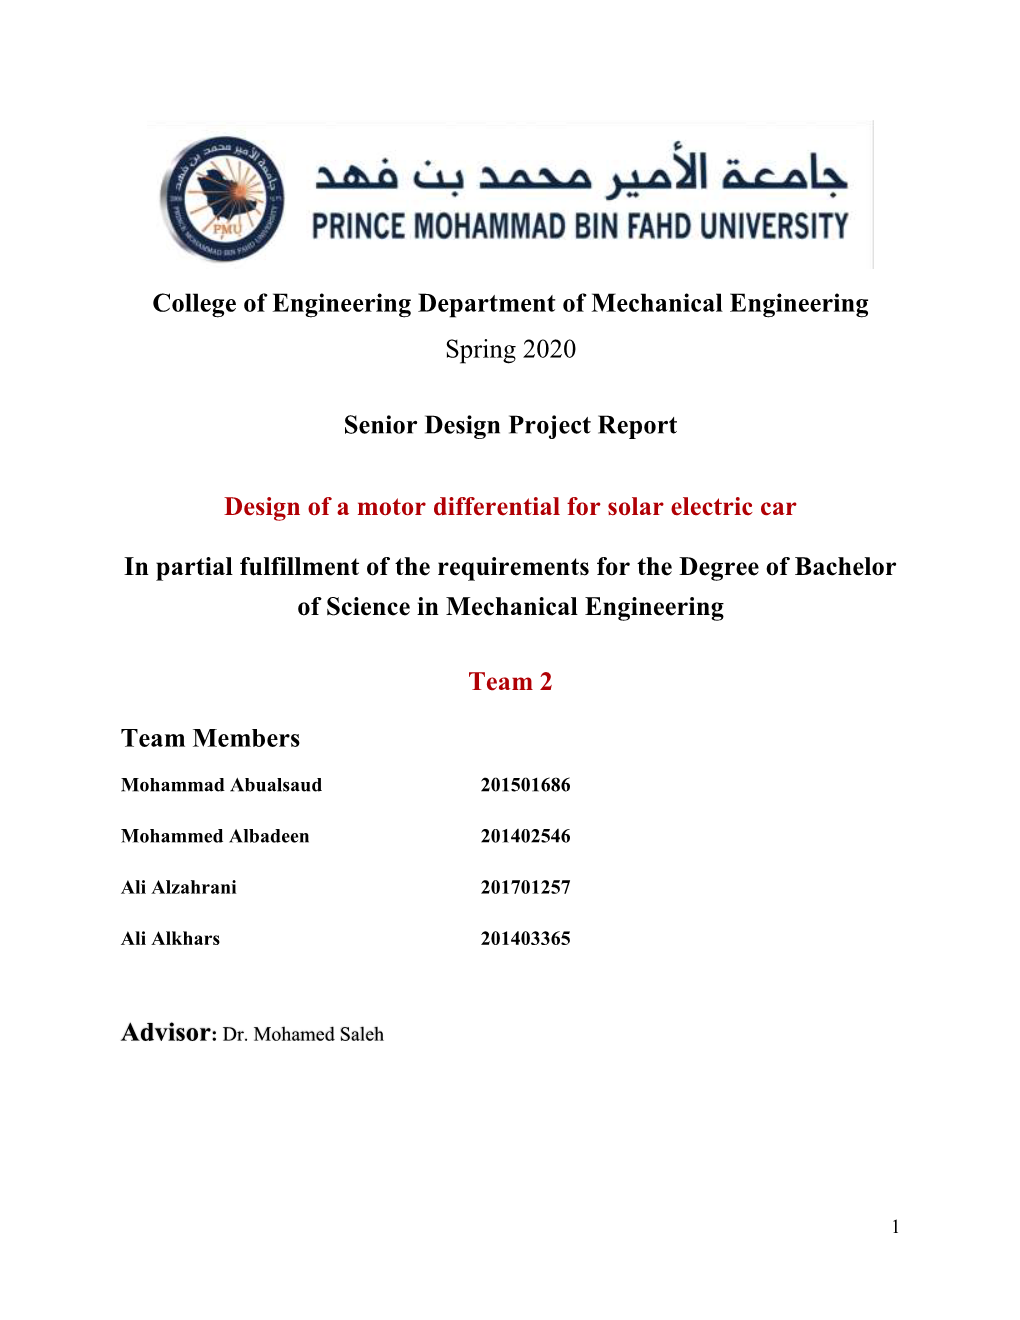 College of Engineering Department of Mechanical Engineering Spring 2020 Senior Design Project Report Design of a Motor Different